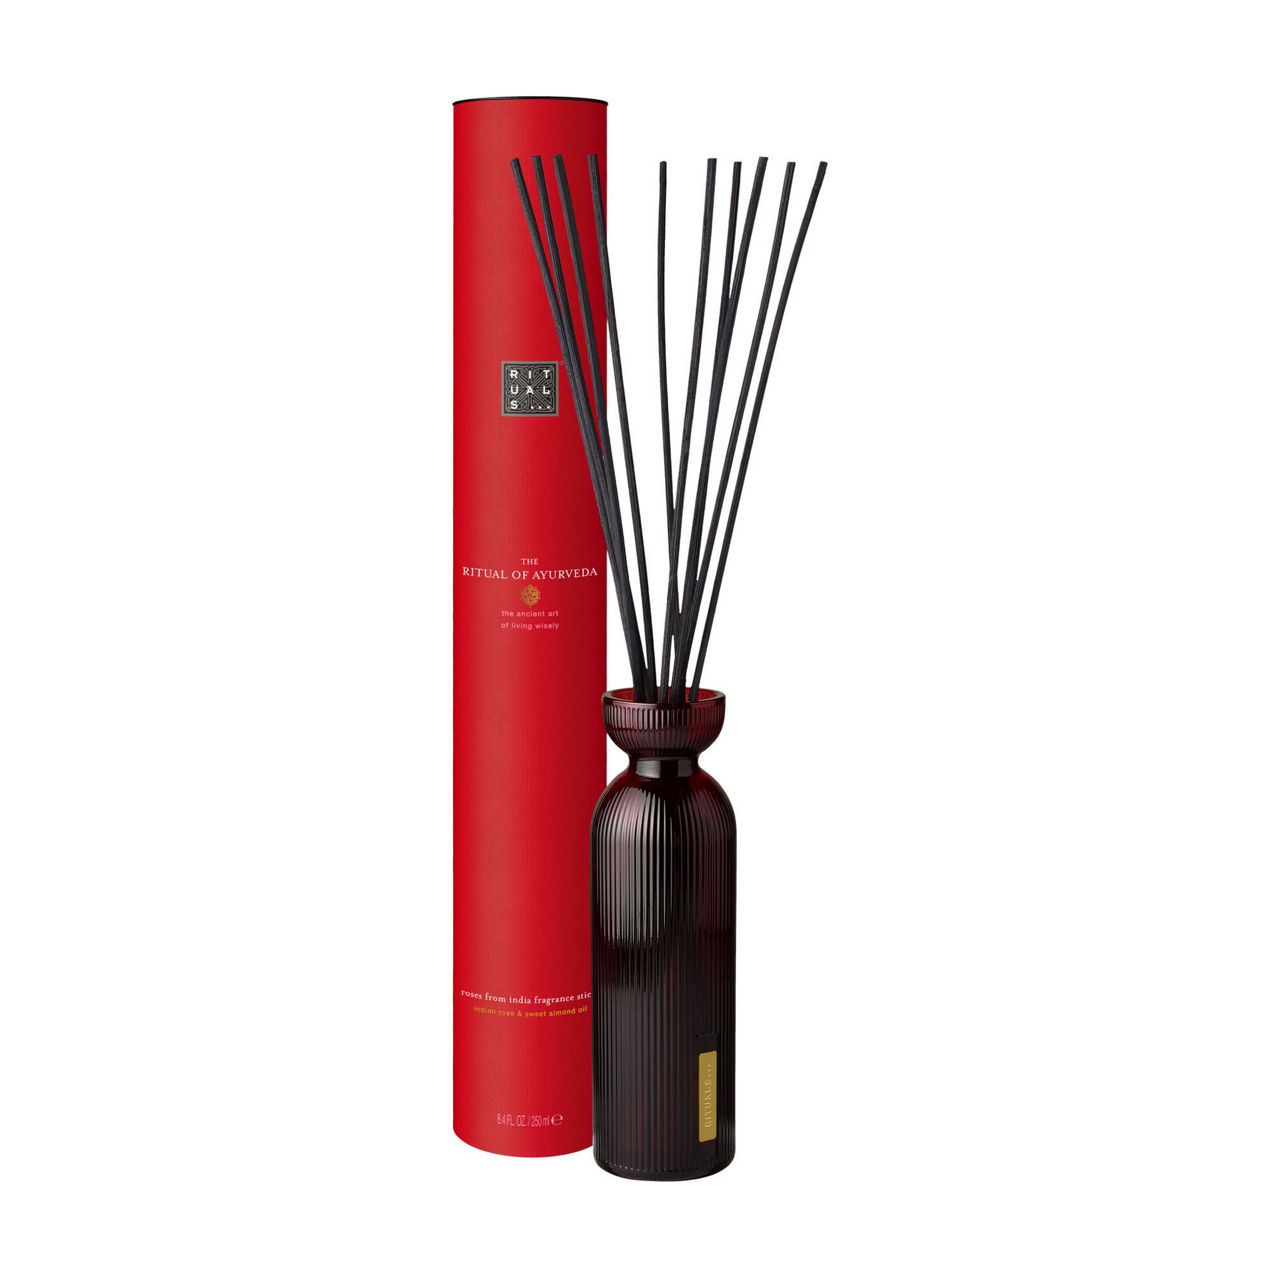 Rituals Fragrance Sticks - The Ritual Of Mehr 250ml Home Scent